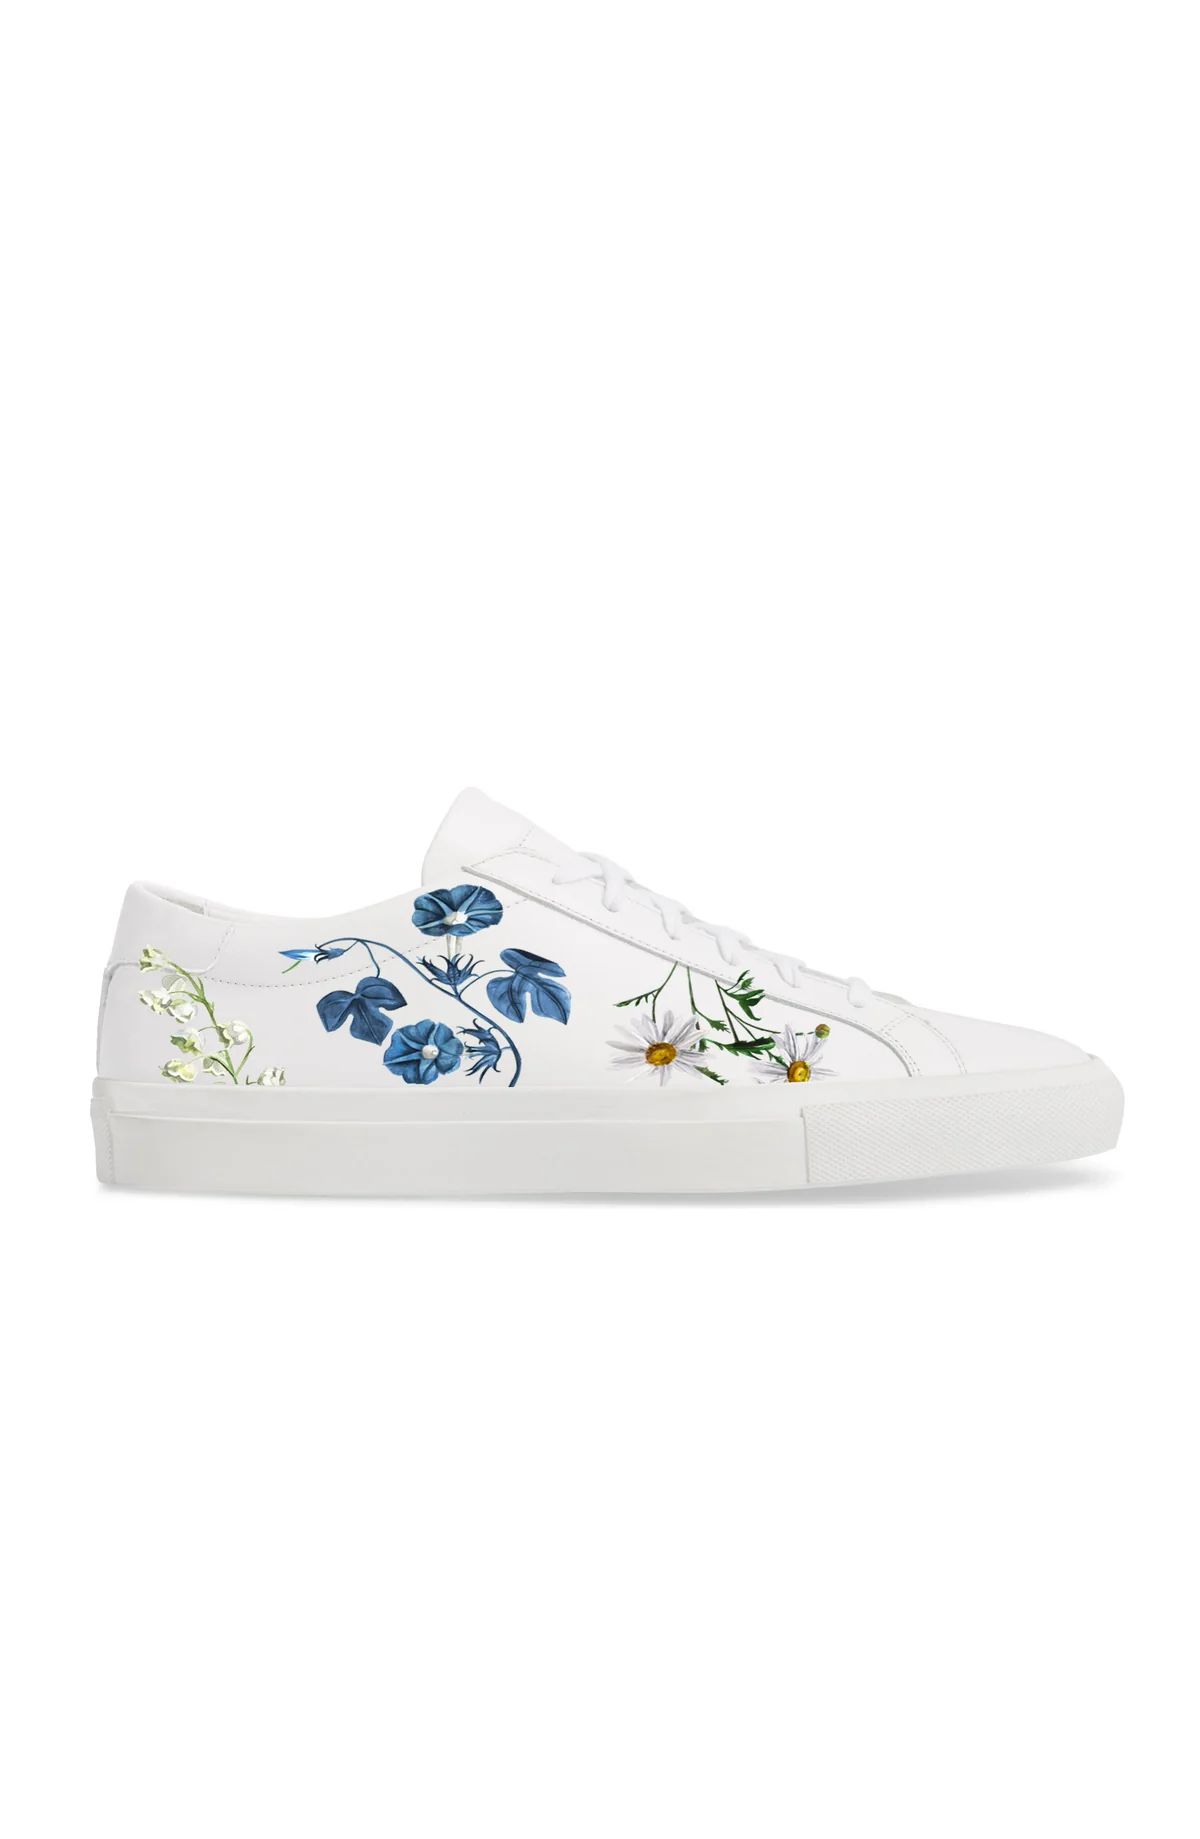 Just Married Floral Garden Sneaker | Over The Moon